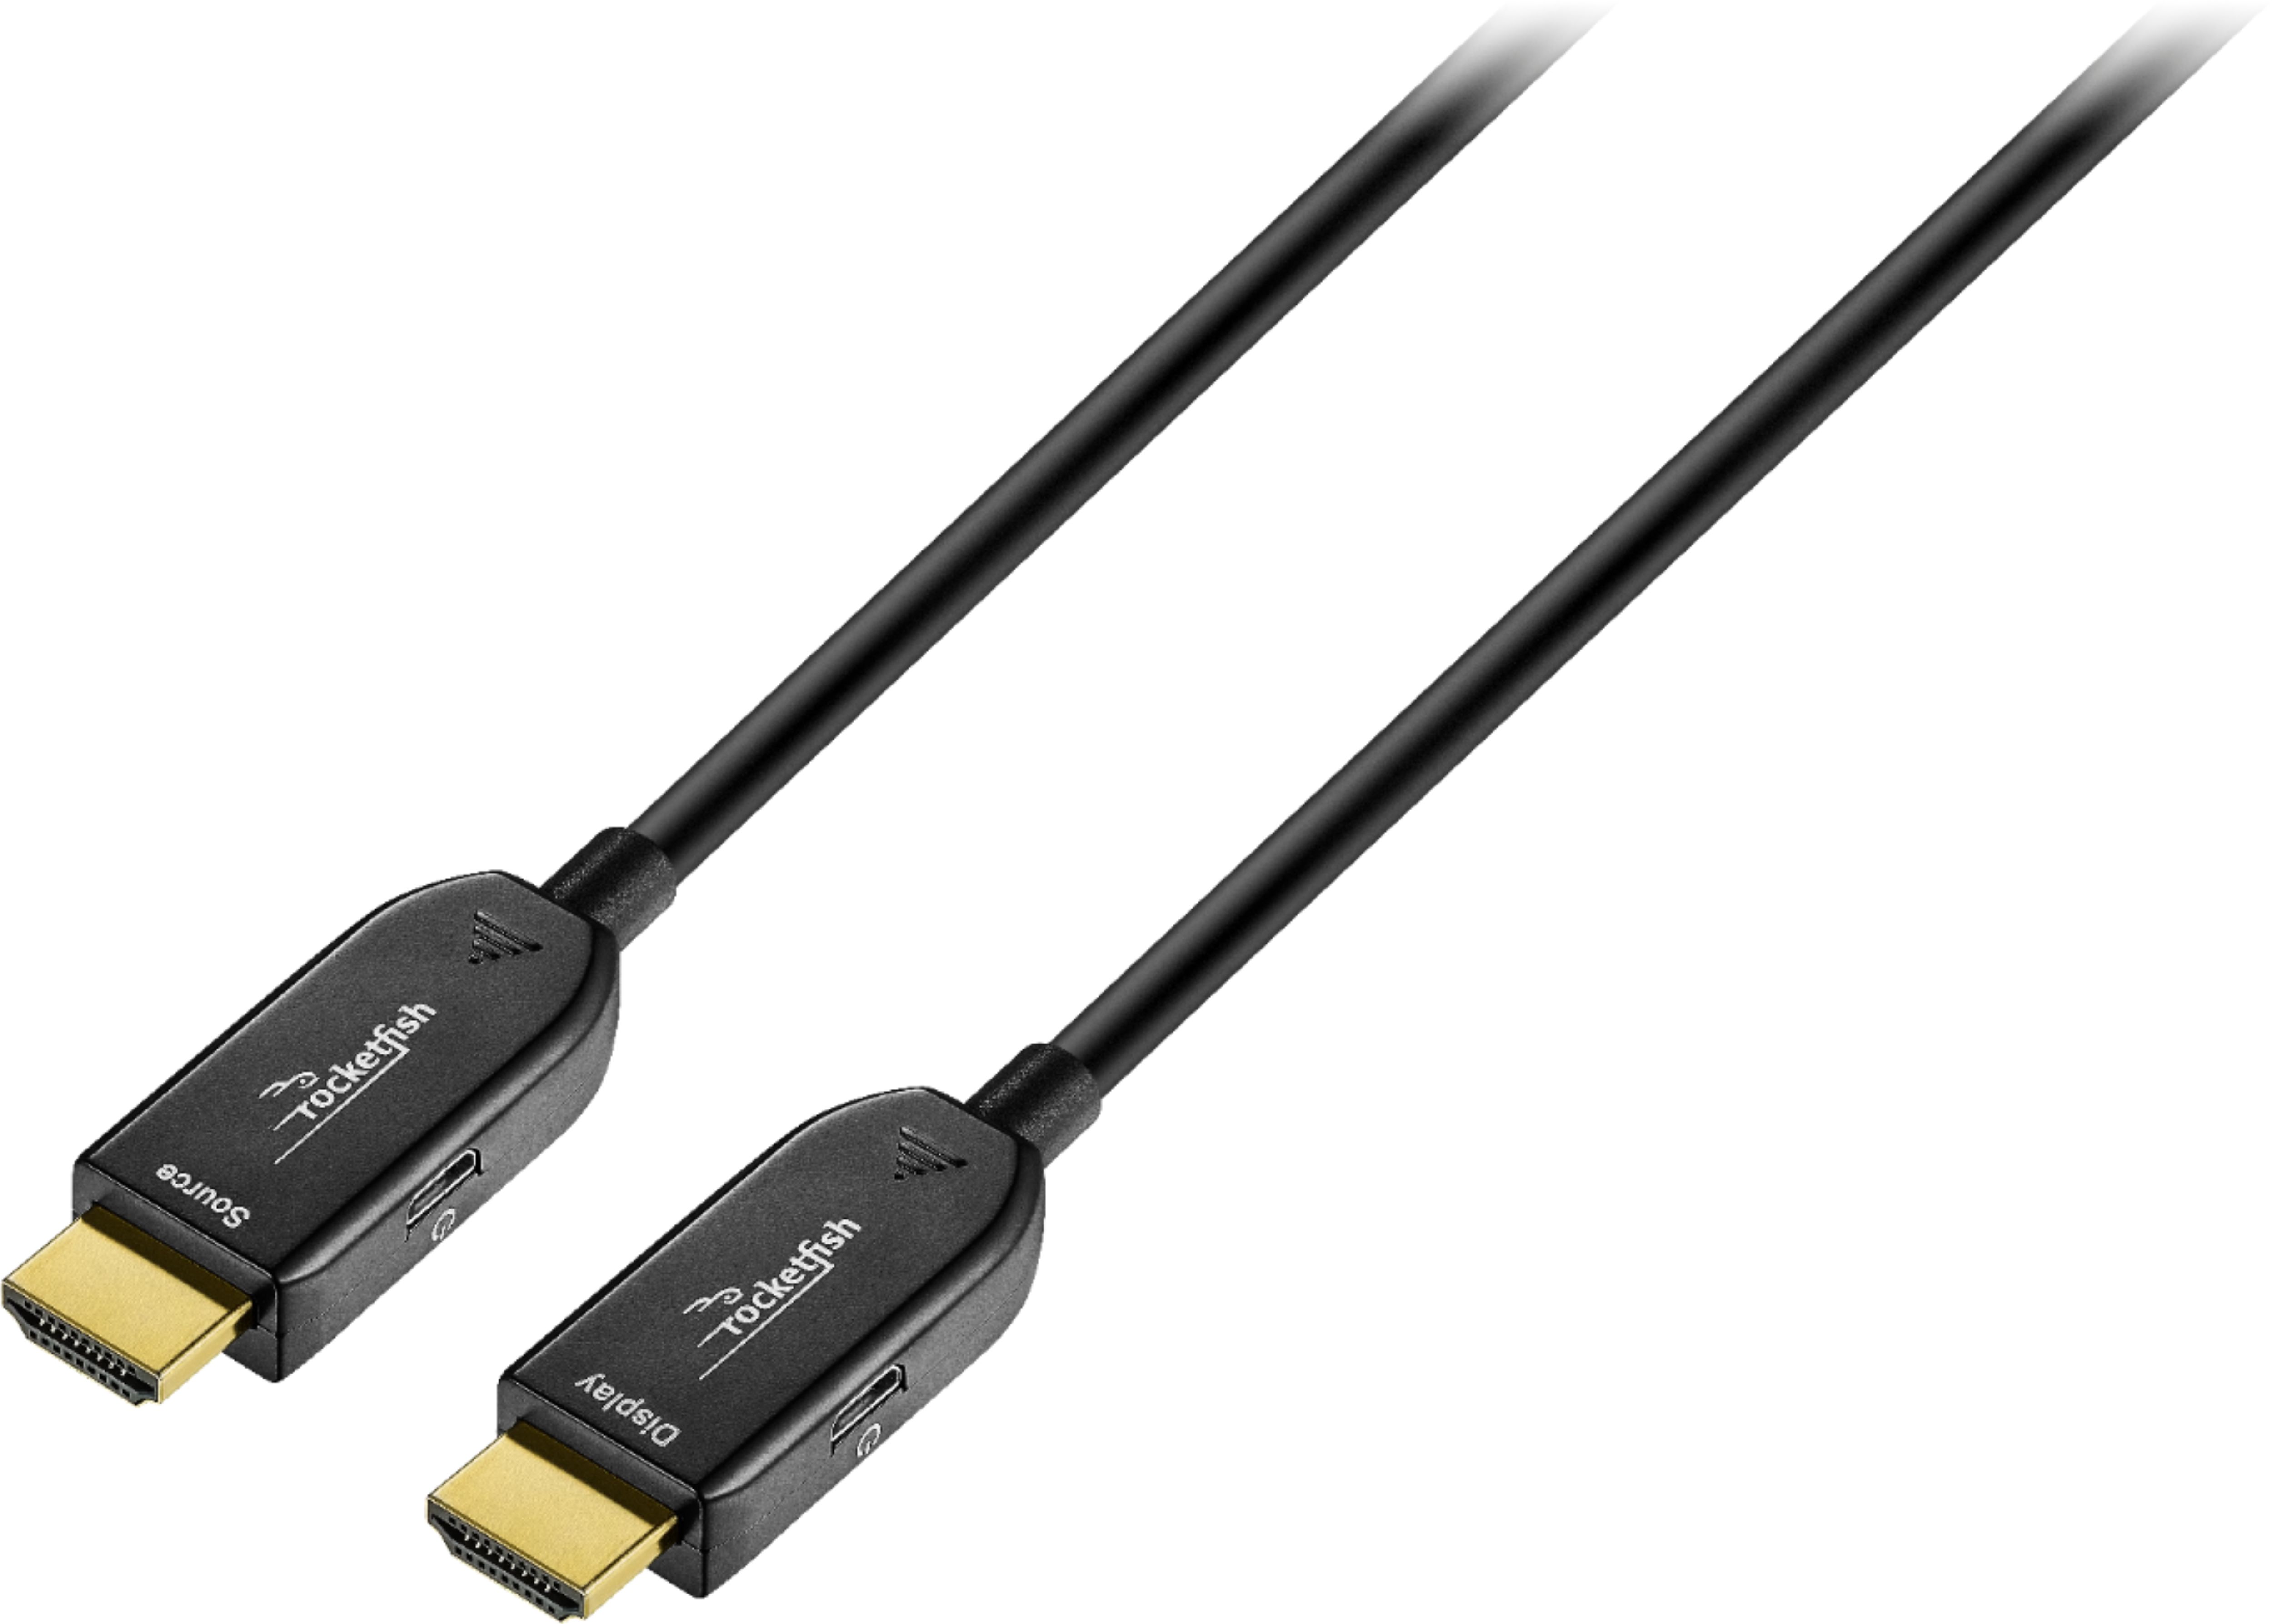 Optical vs HDMI: Which Is Better? 